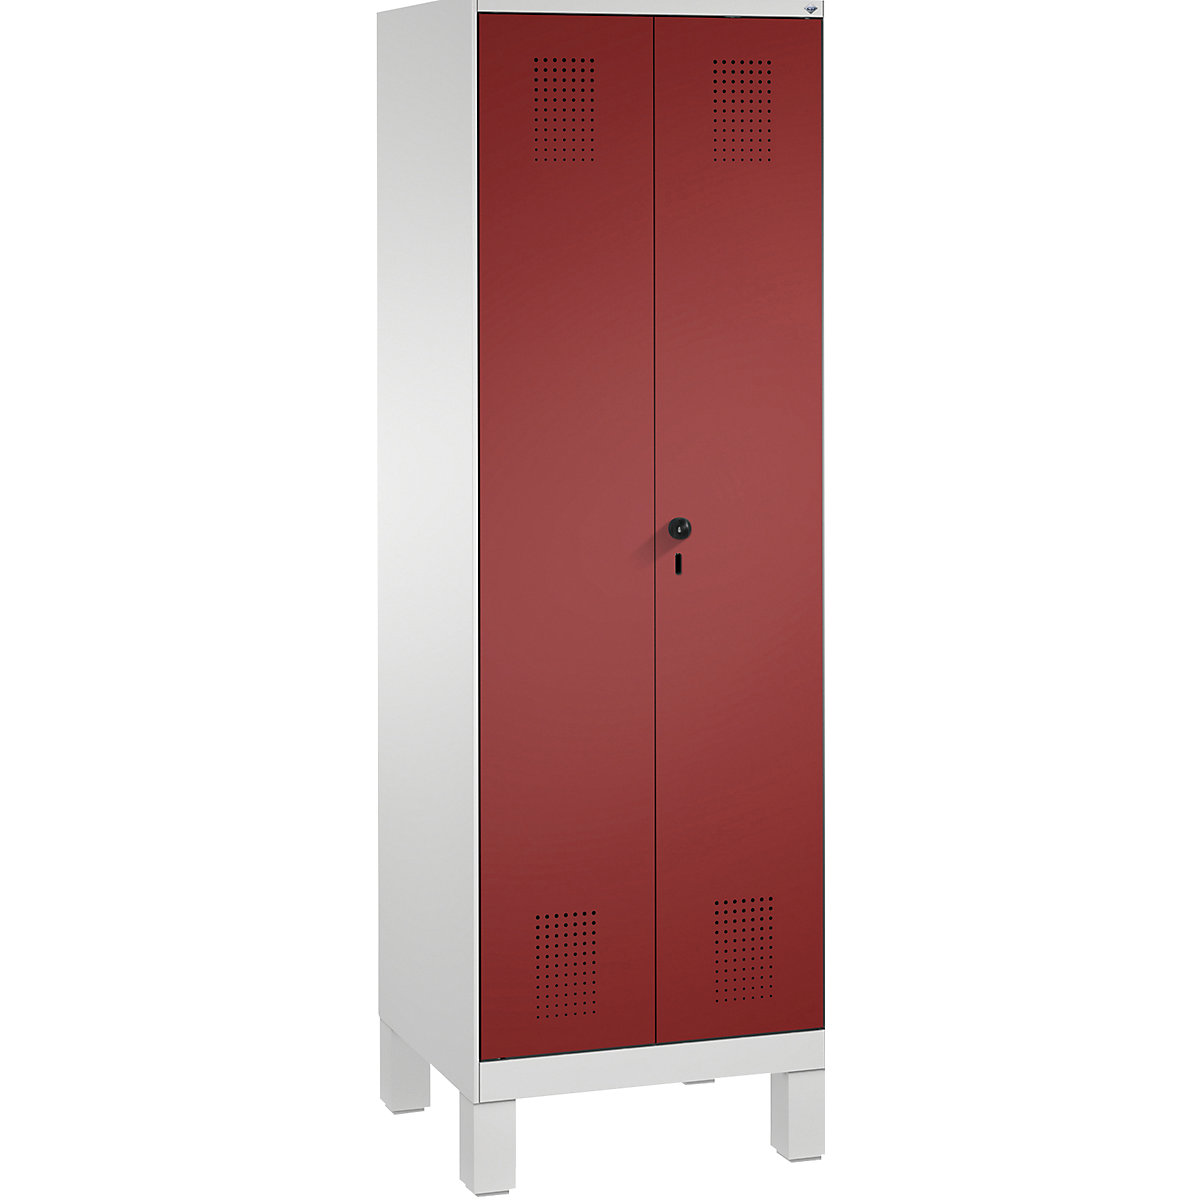 EVOLO storage cupboard, doors close in the middle, with feet – C+P, 2 compartments, 8 shelves, compartment width 300 mm, light grey / ruby red